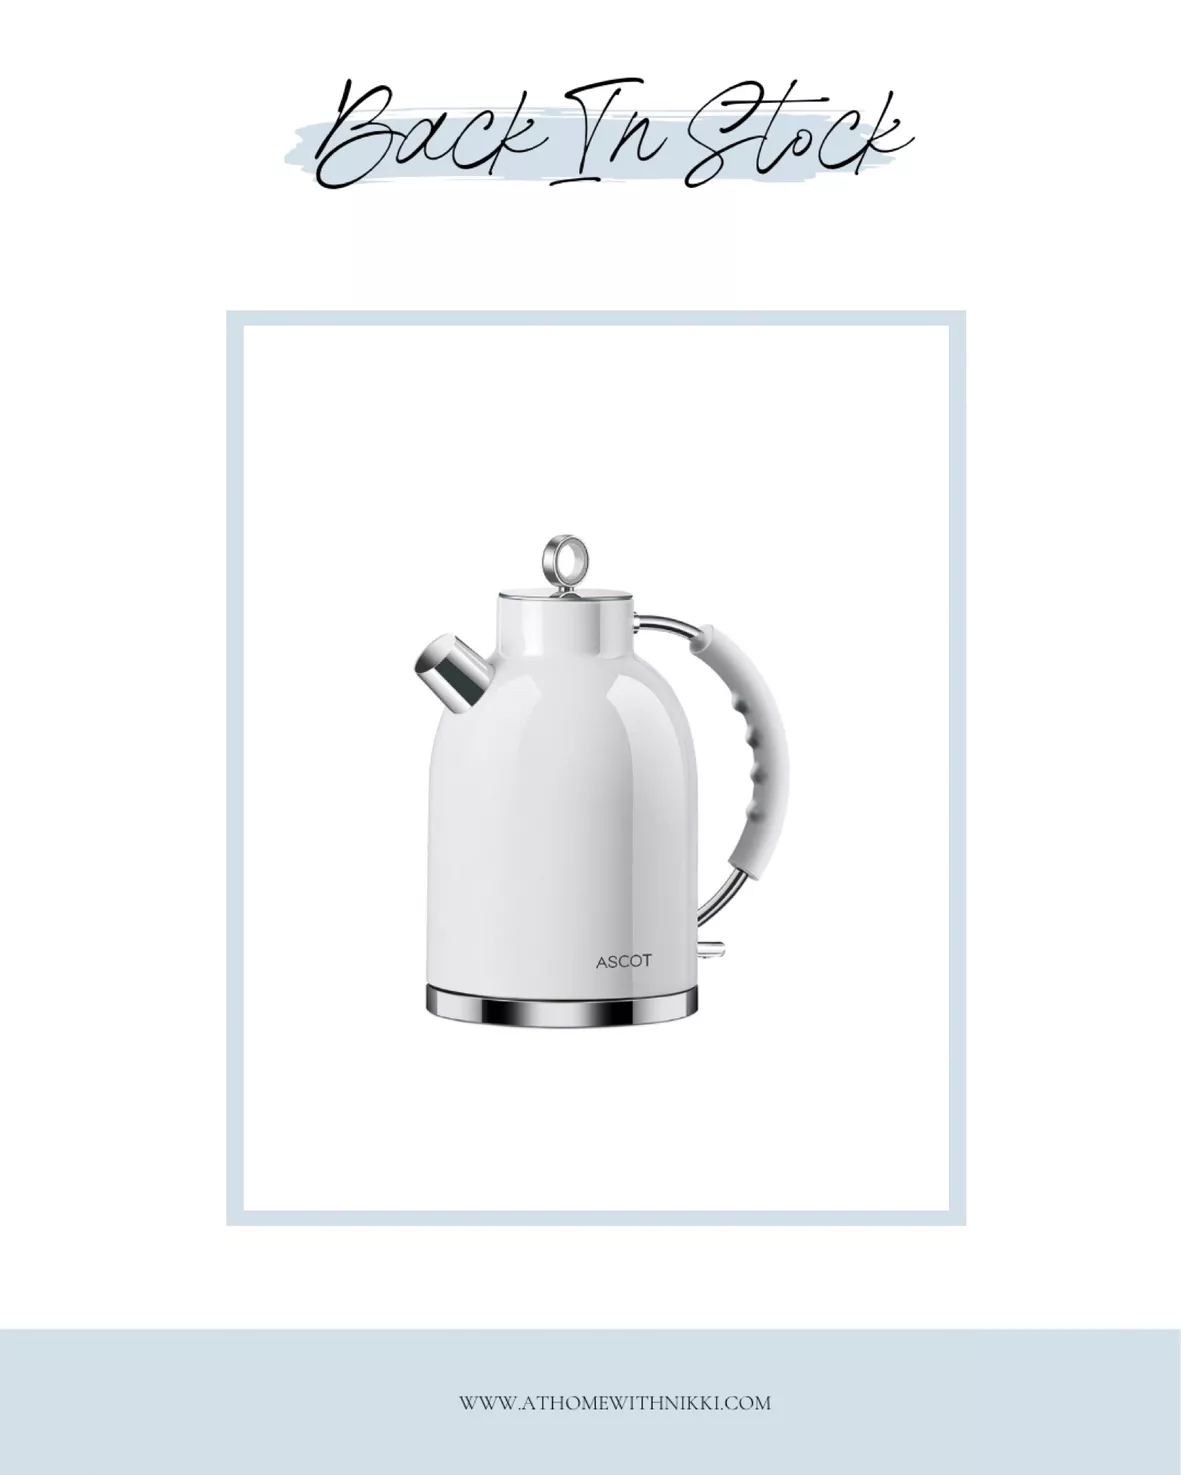 Electric Kettle, ASCOT Stainless Steel Electric Tea Kettle, 1.7QT